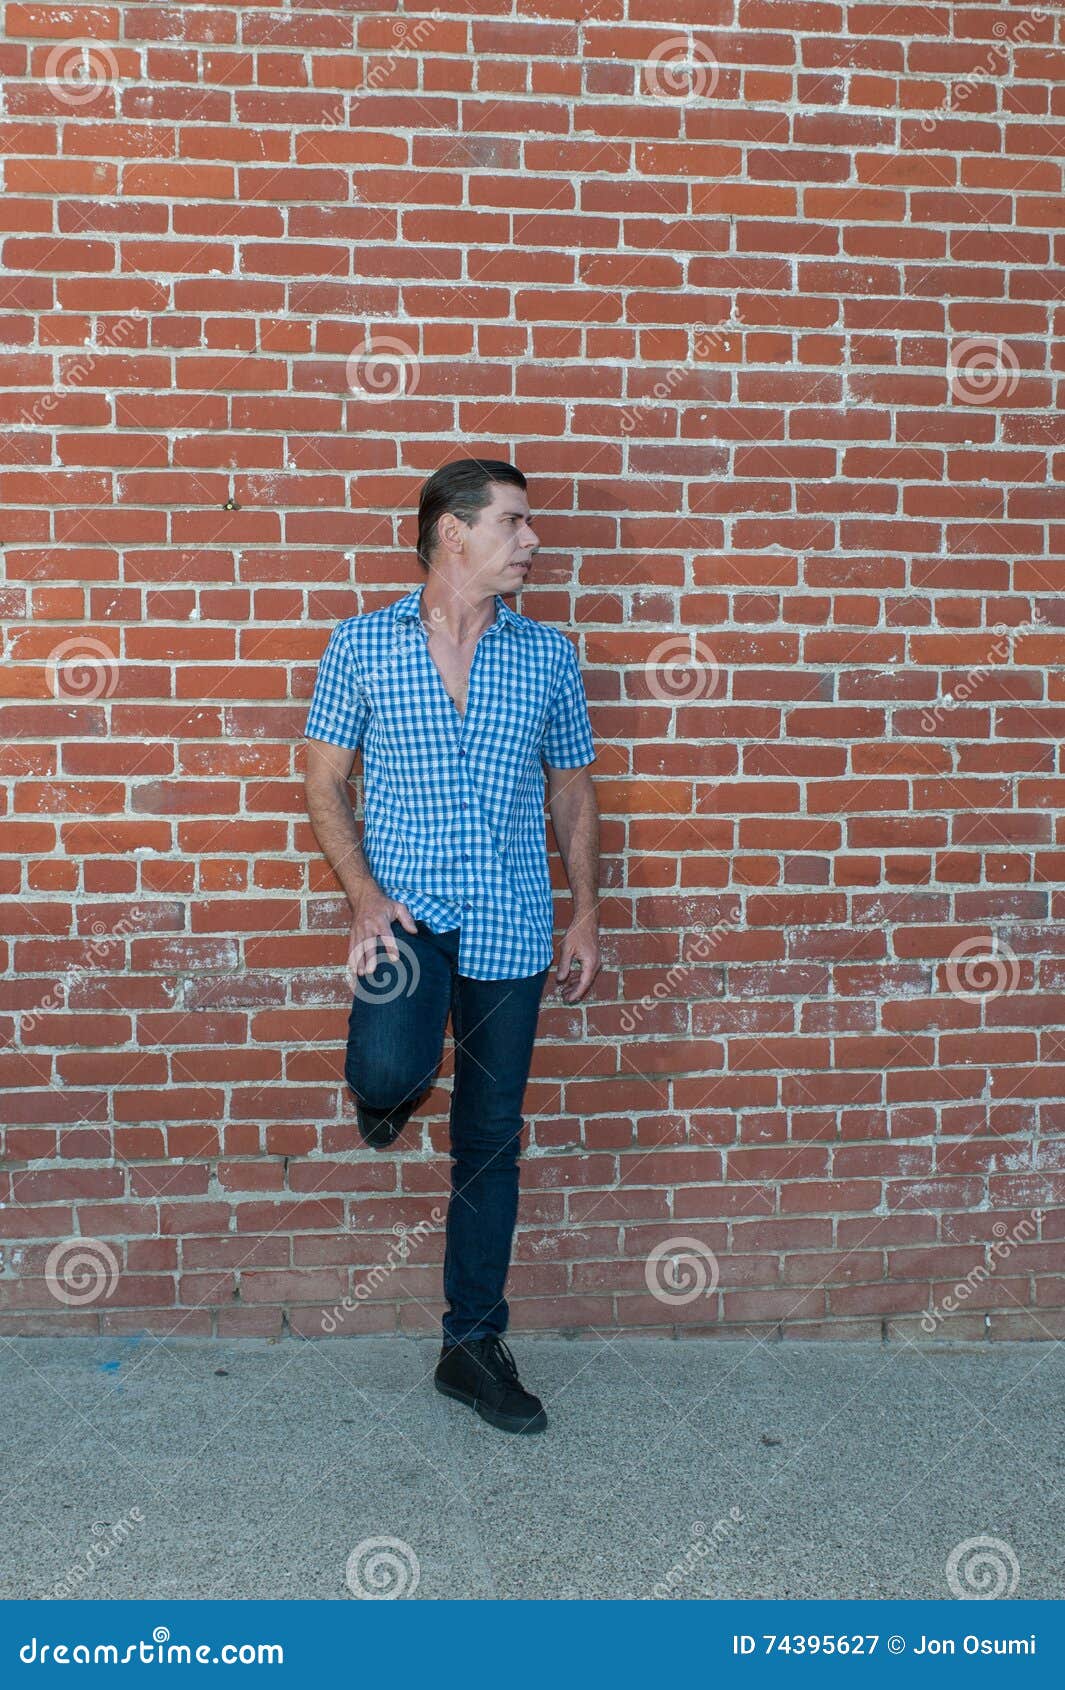 Comfortable Leaning Against the Wall. Stock Image - Image of standing ...